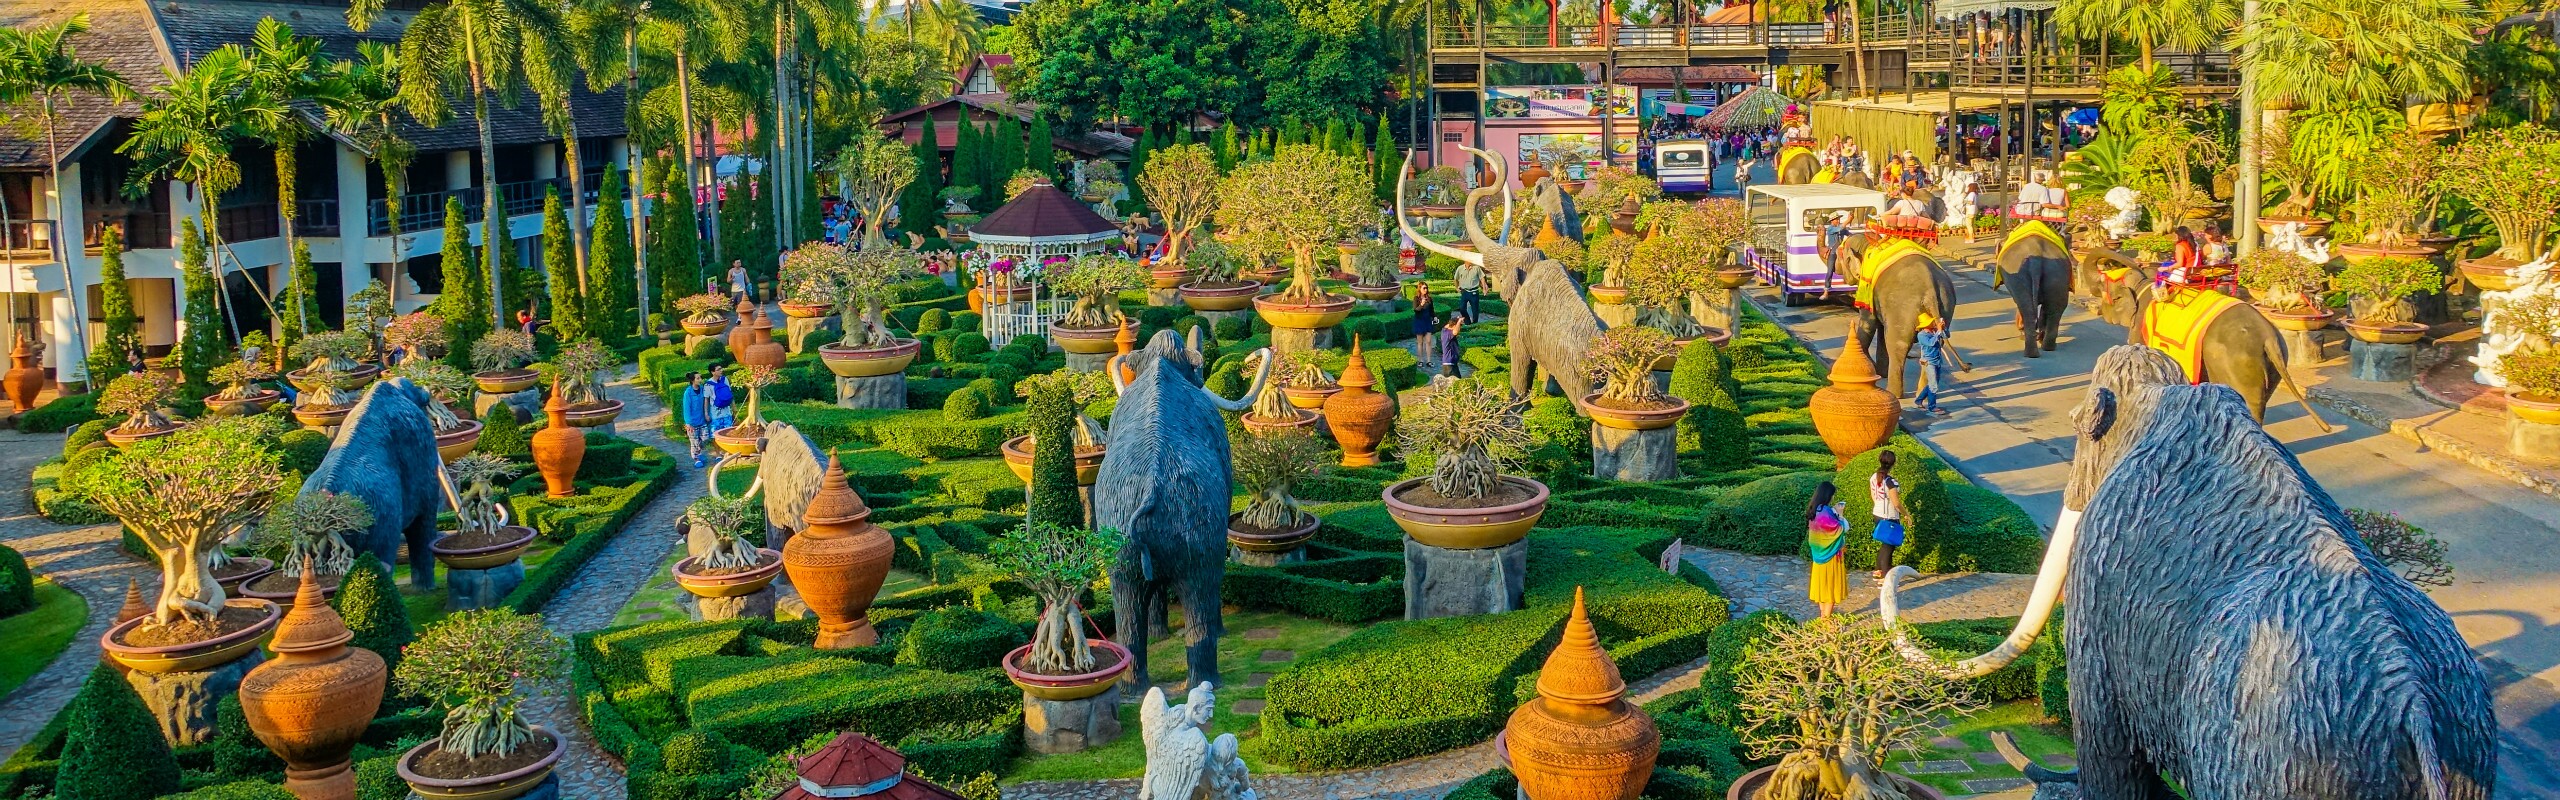 Top 10 Things to Do in Pattaya